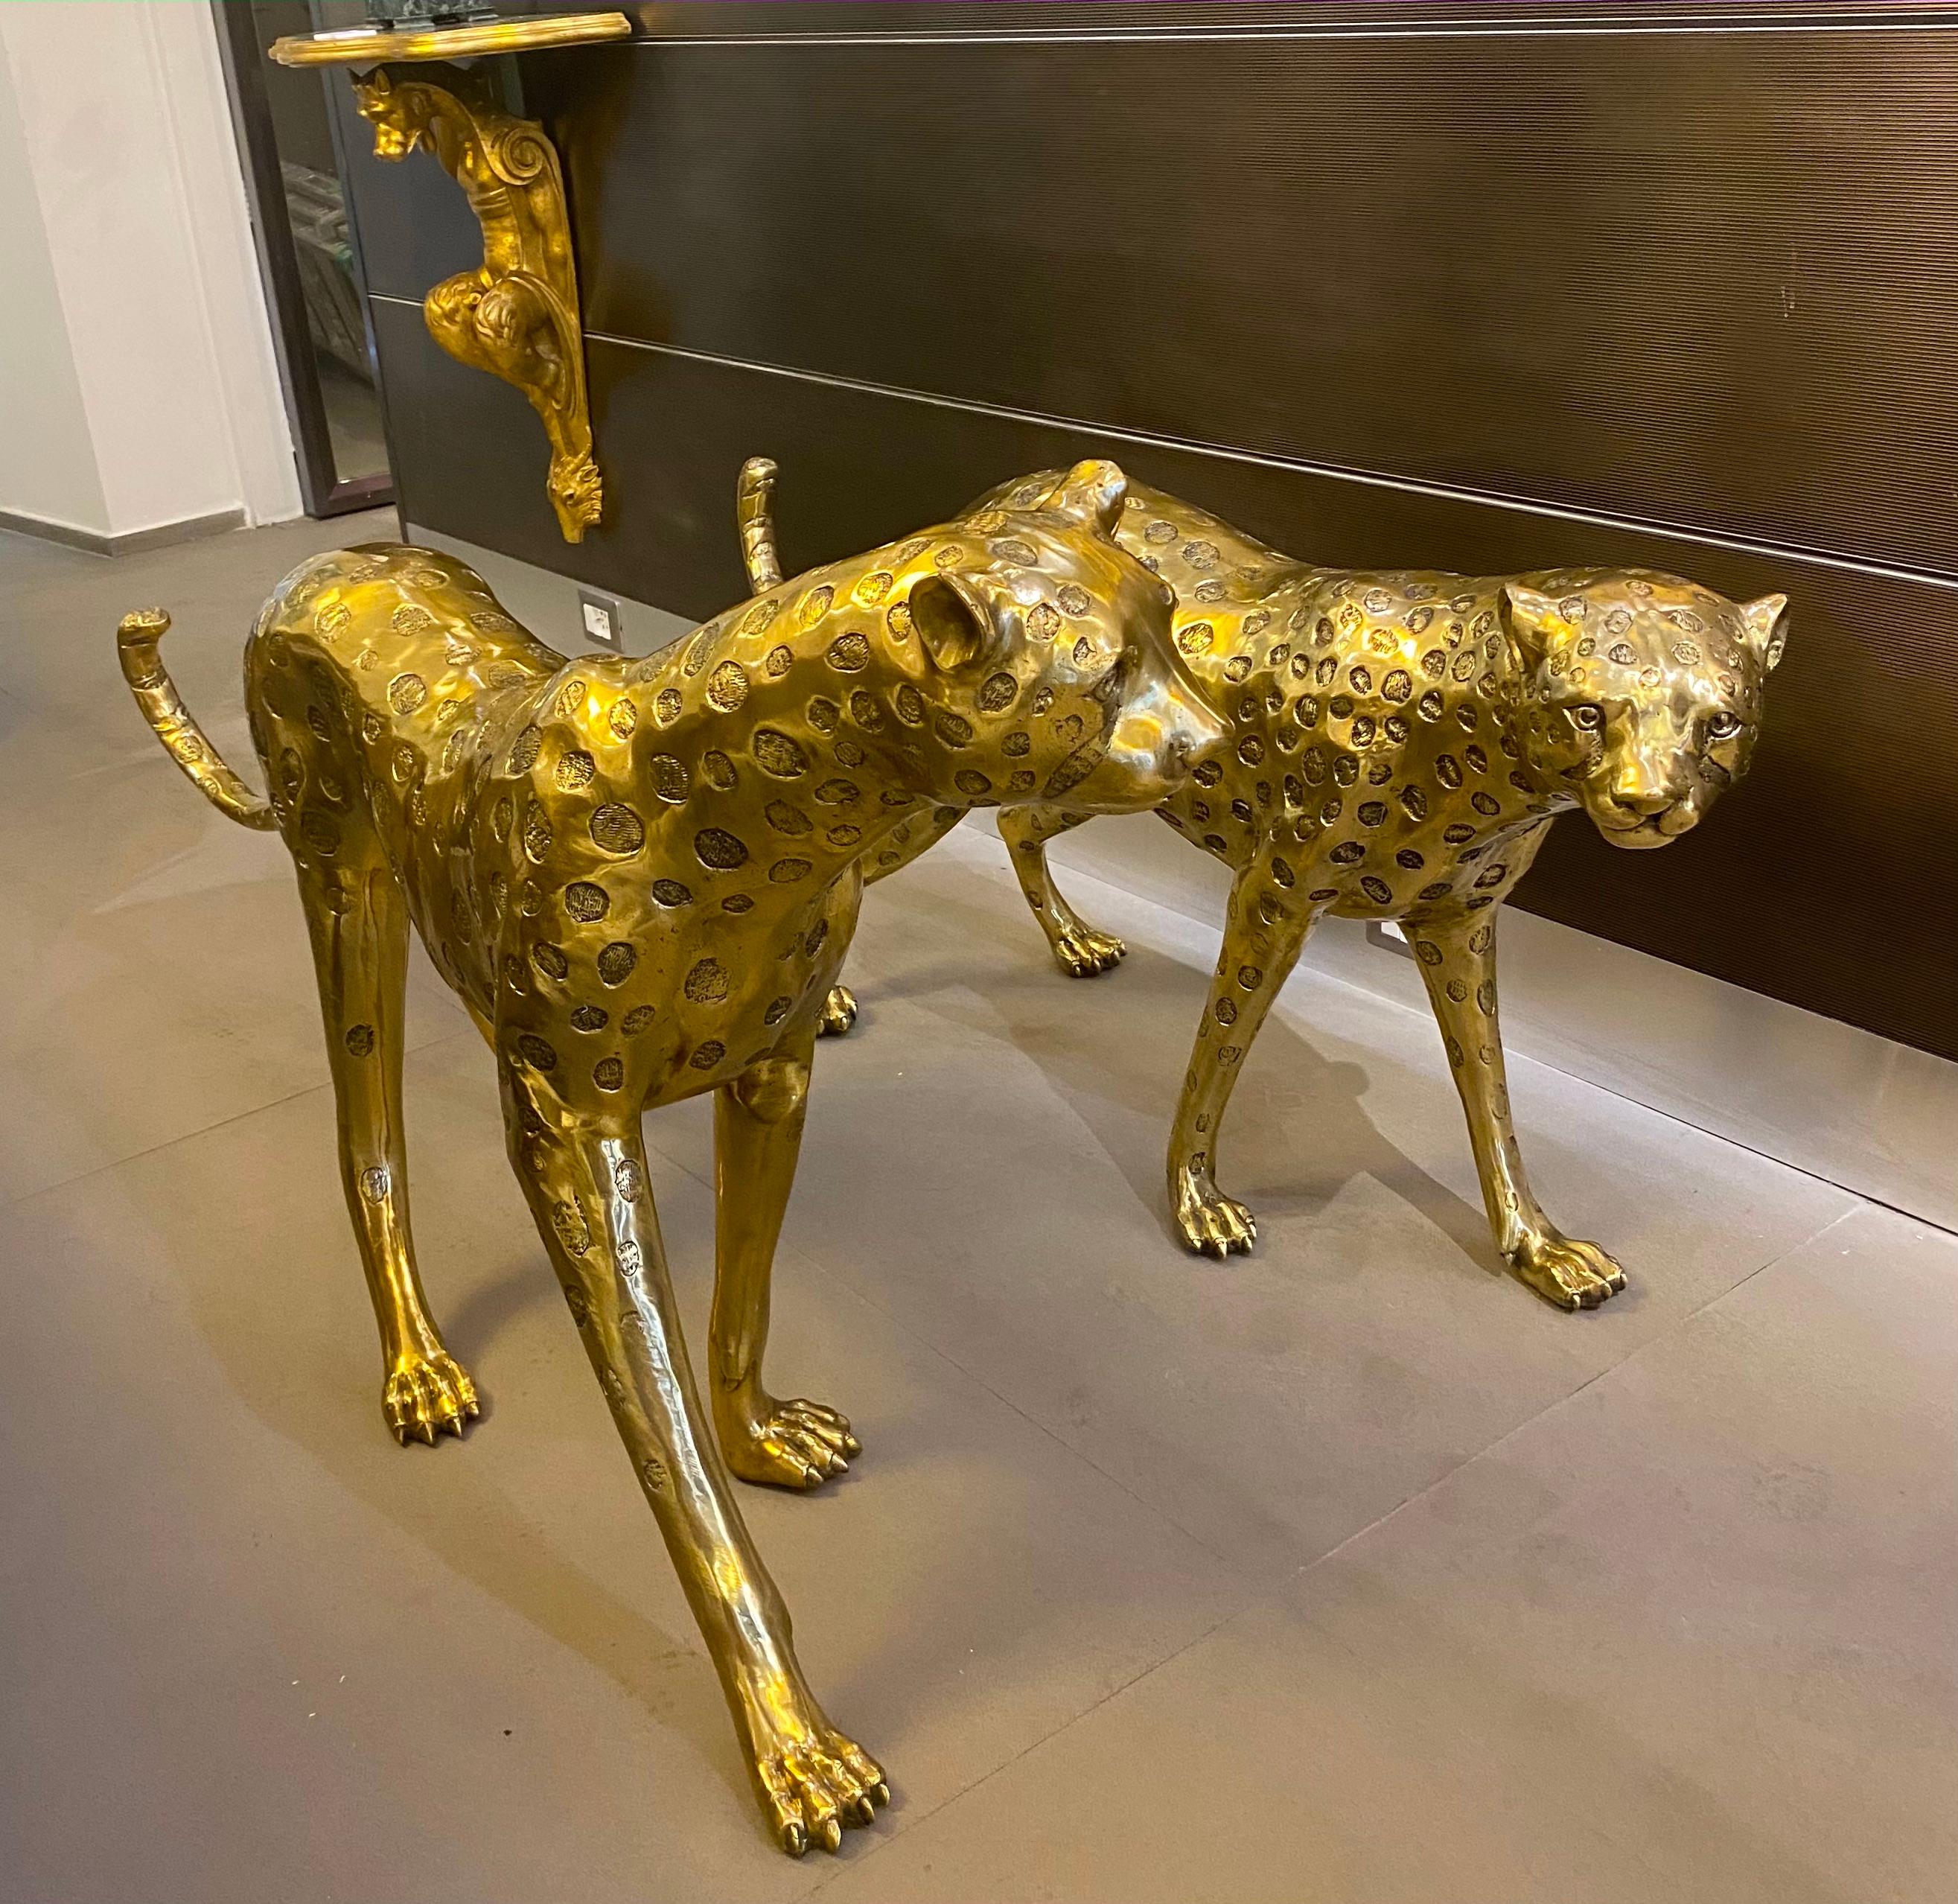 Fantastic pair of gilt bronze leopard sculptures . The item will be well-suited to either an indoor or outdoor setting.